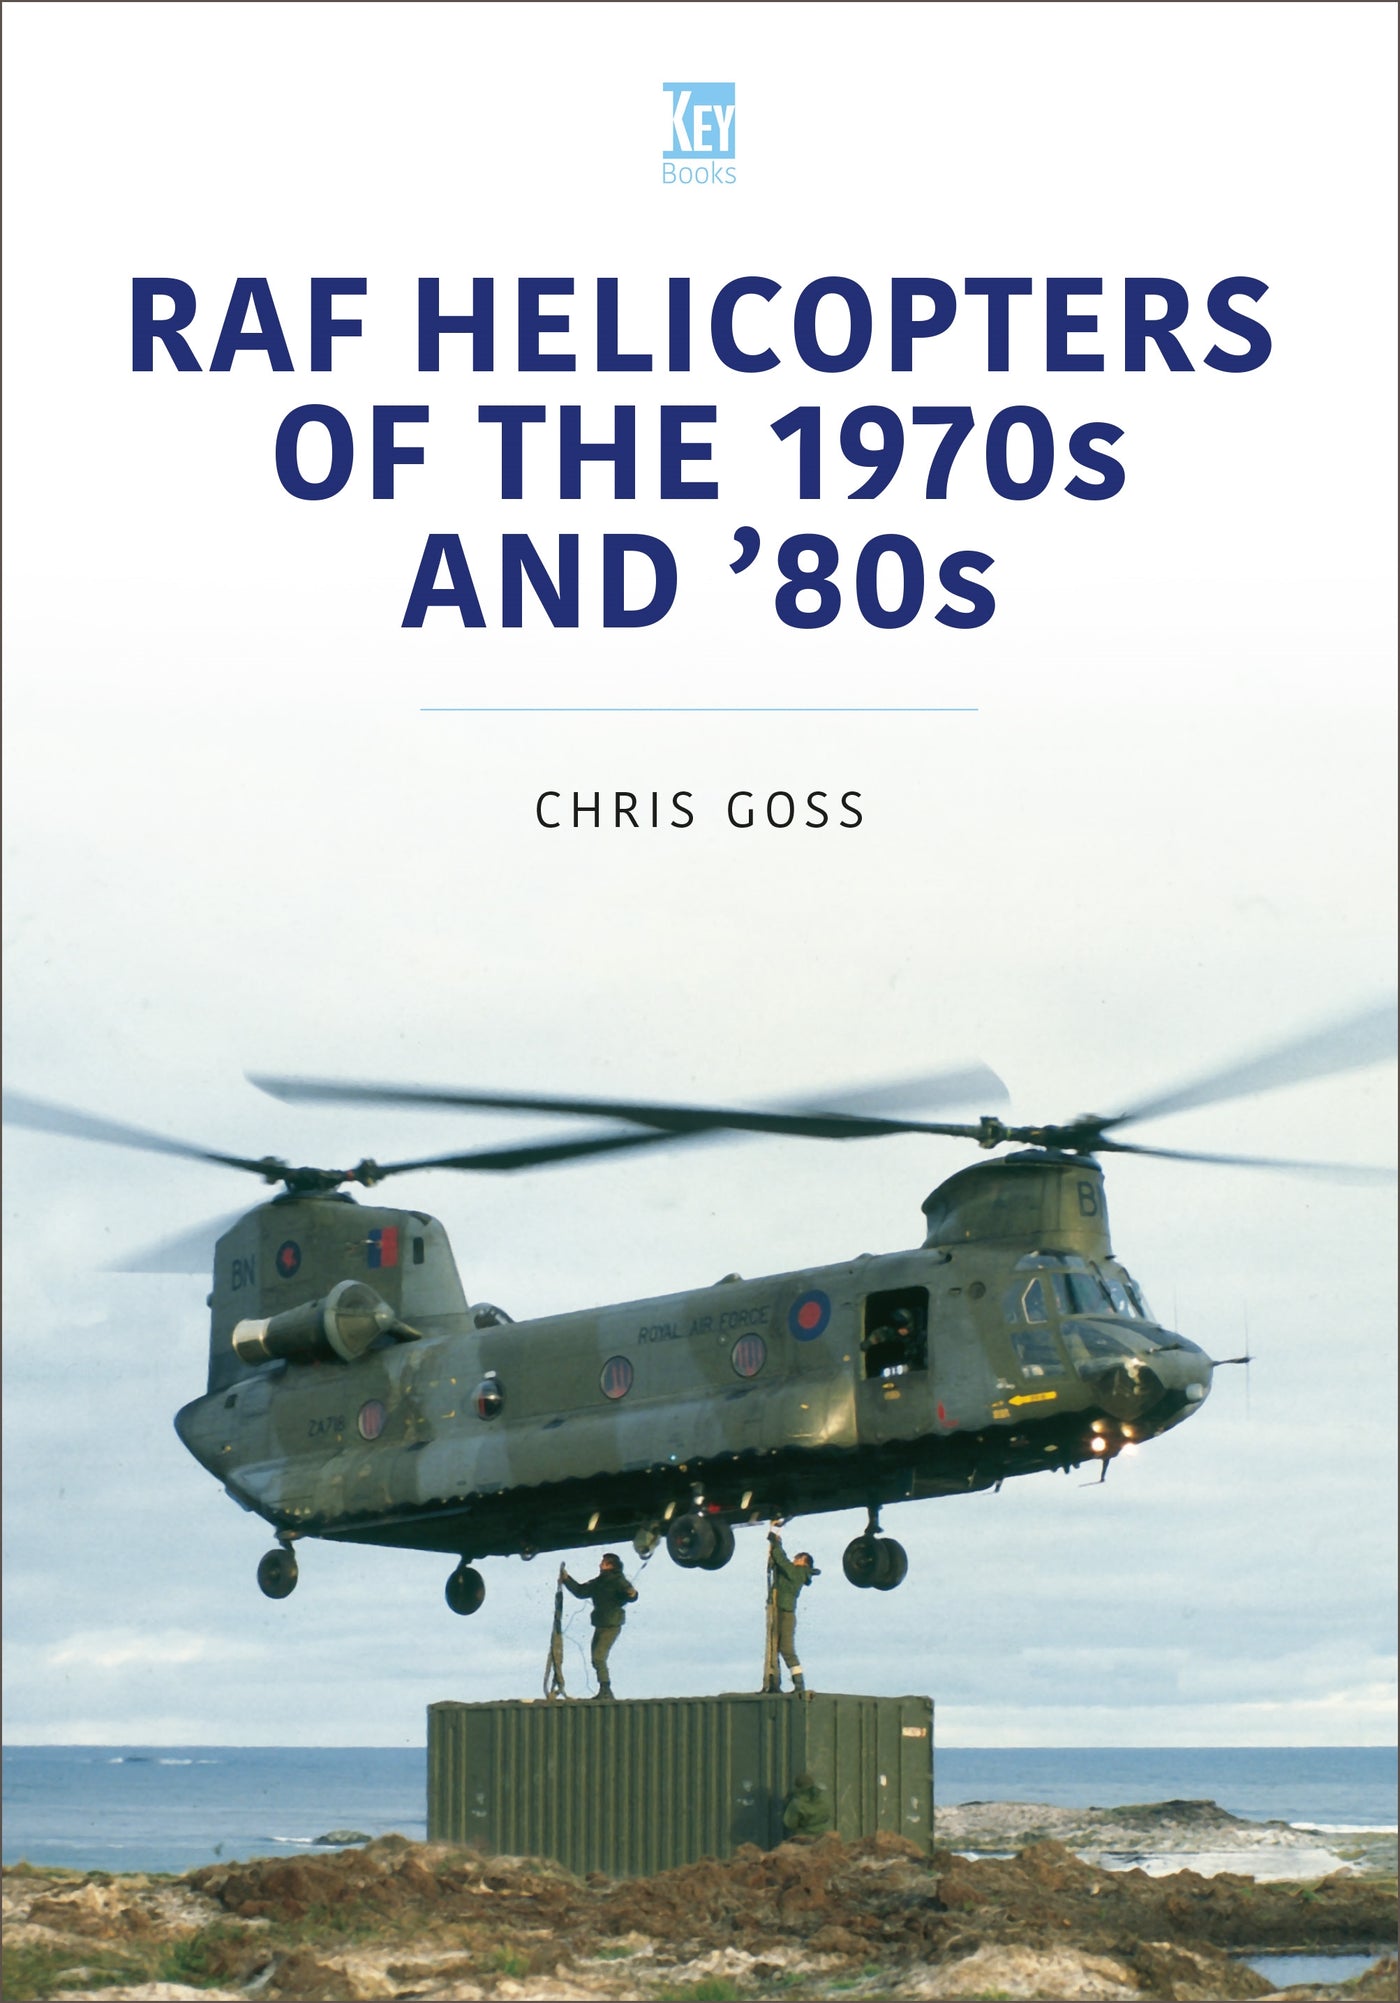 RAF Helicopters of the 1970s and '80s